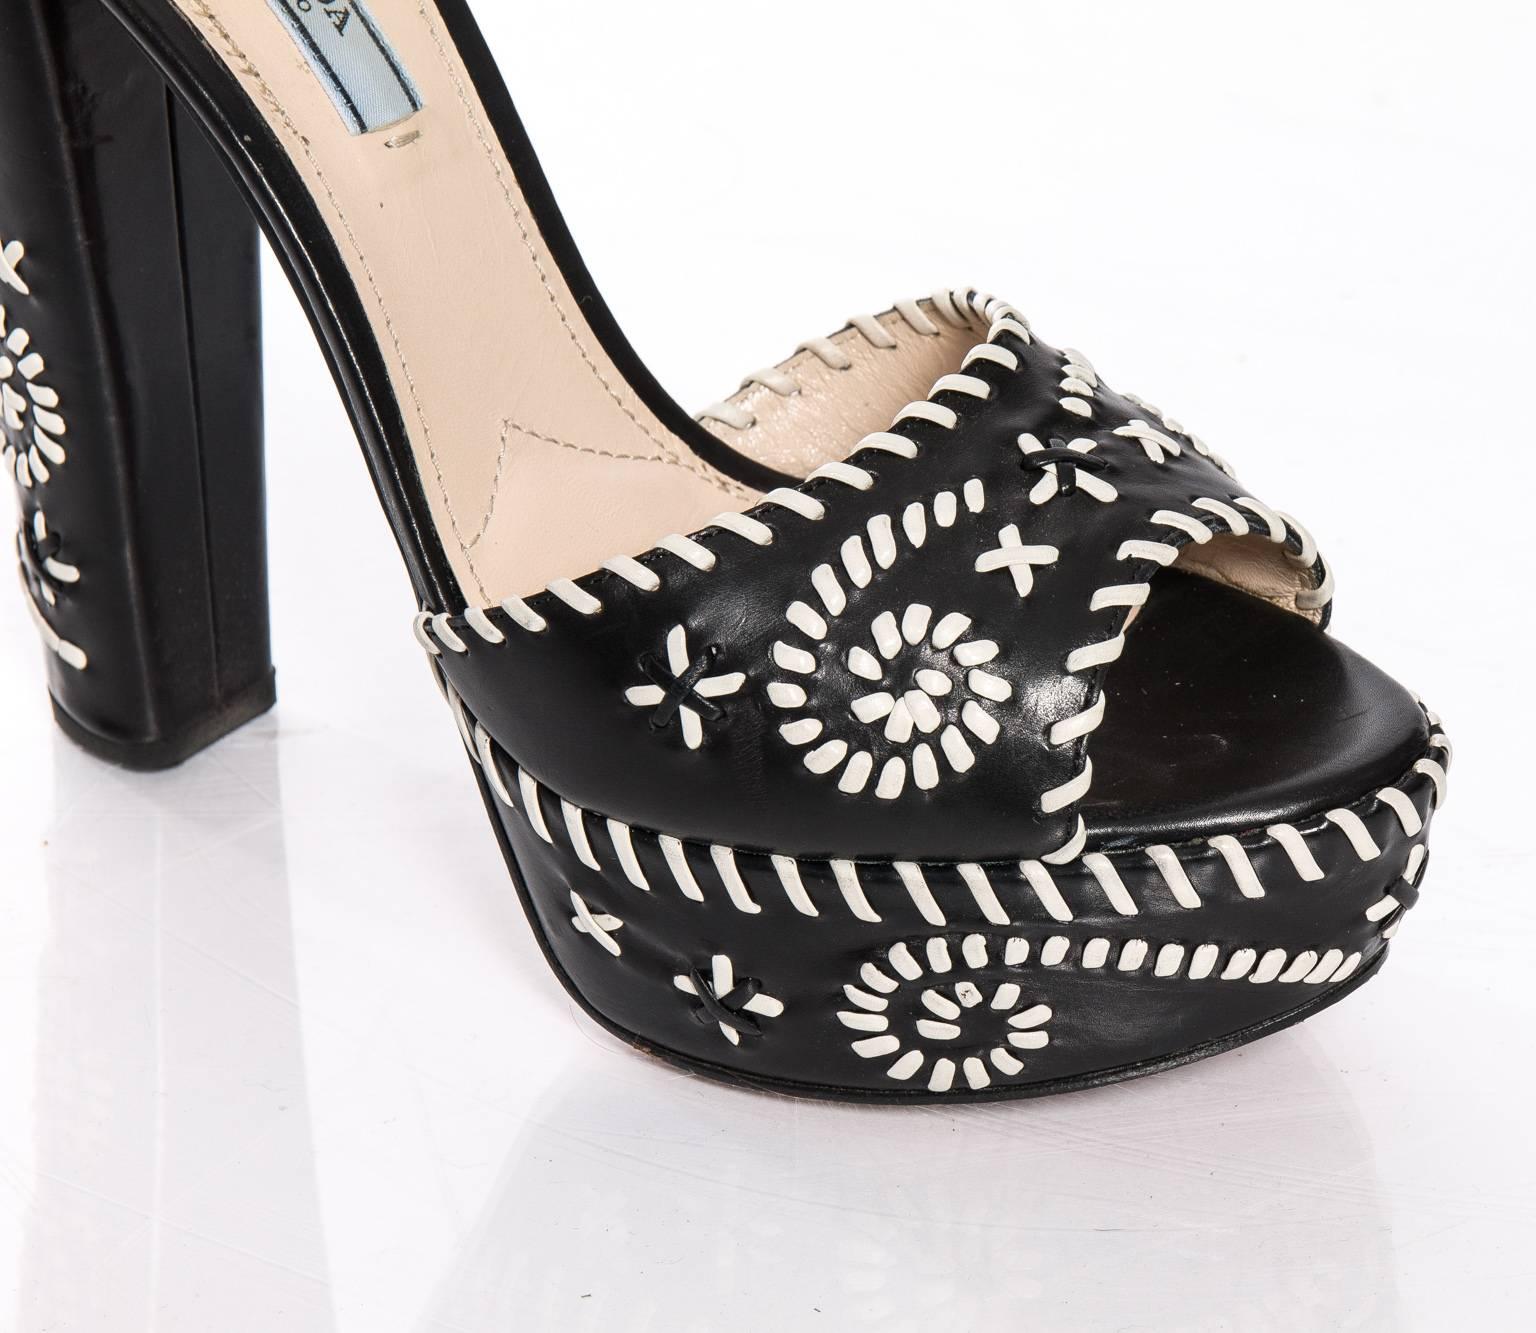 Pair of Prada black and white whipstitch leather platform sandals For Sale 3